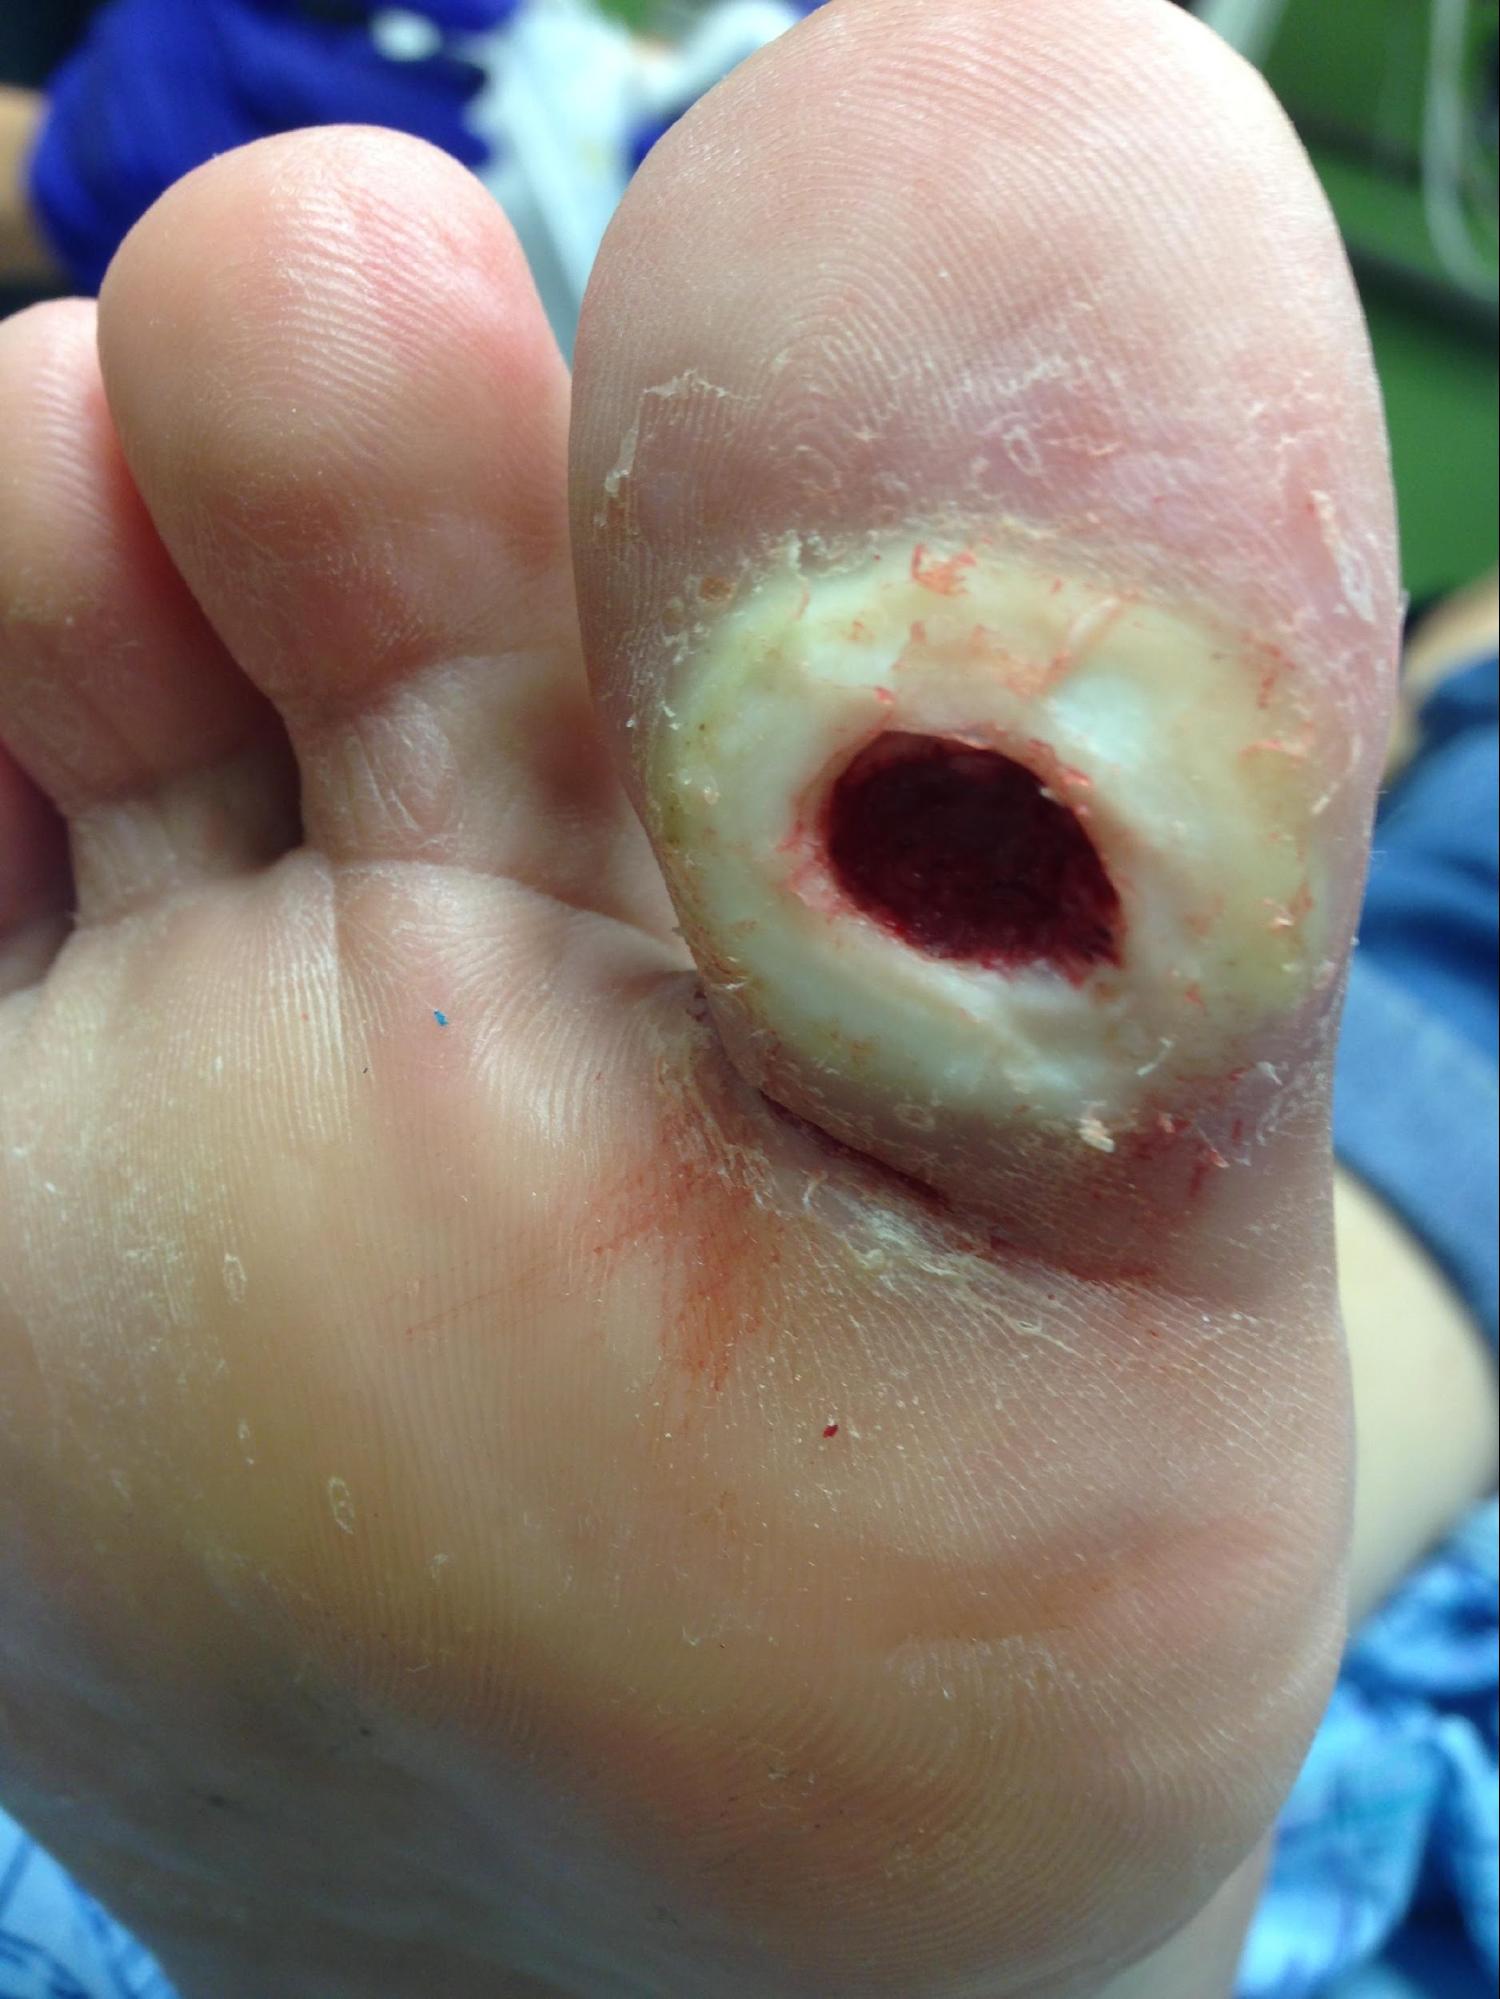 Diabetic Foot Ulcer
Neuropathic ulceration in a diabetic patient. 
Note periwound callous formation. Wagner Grade 2 